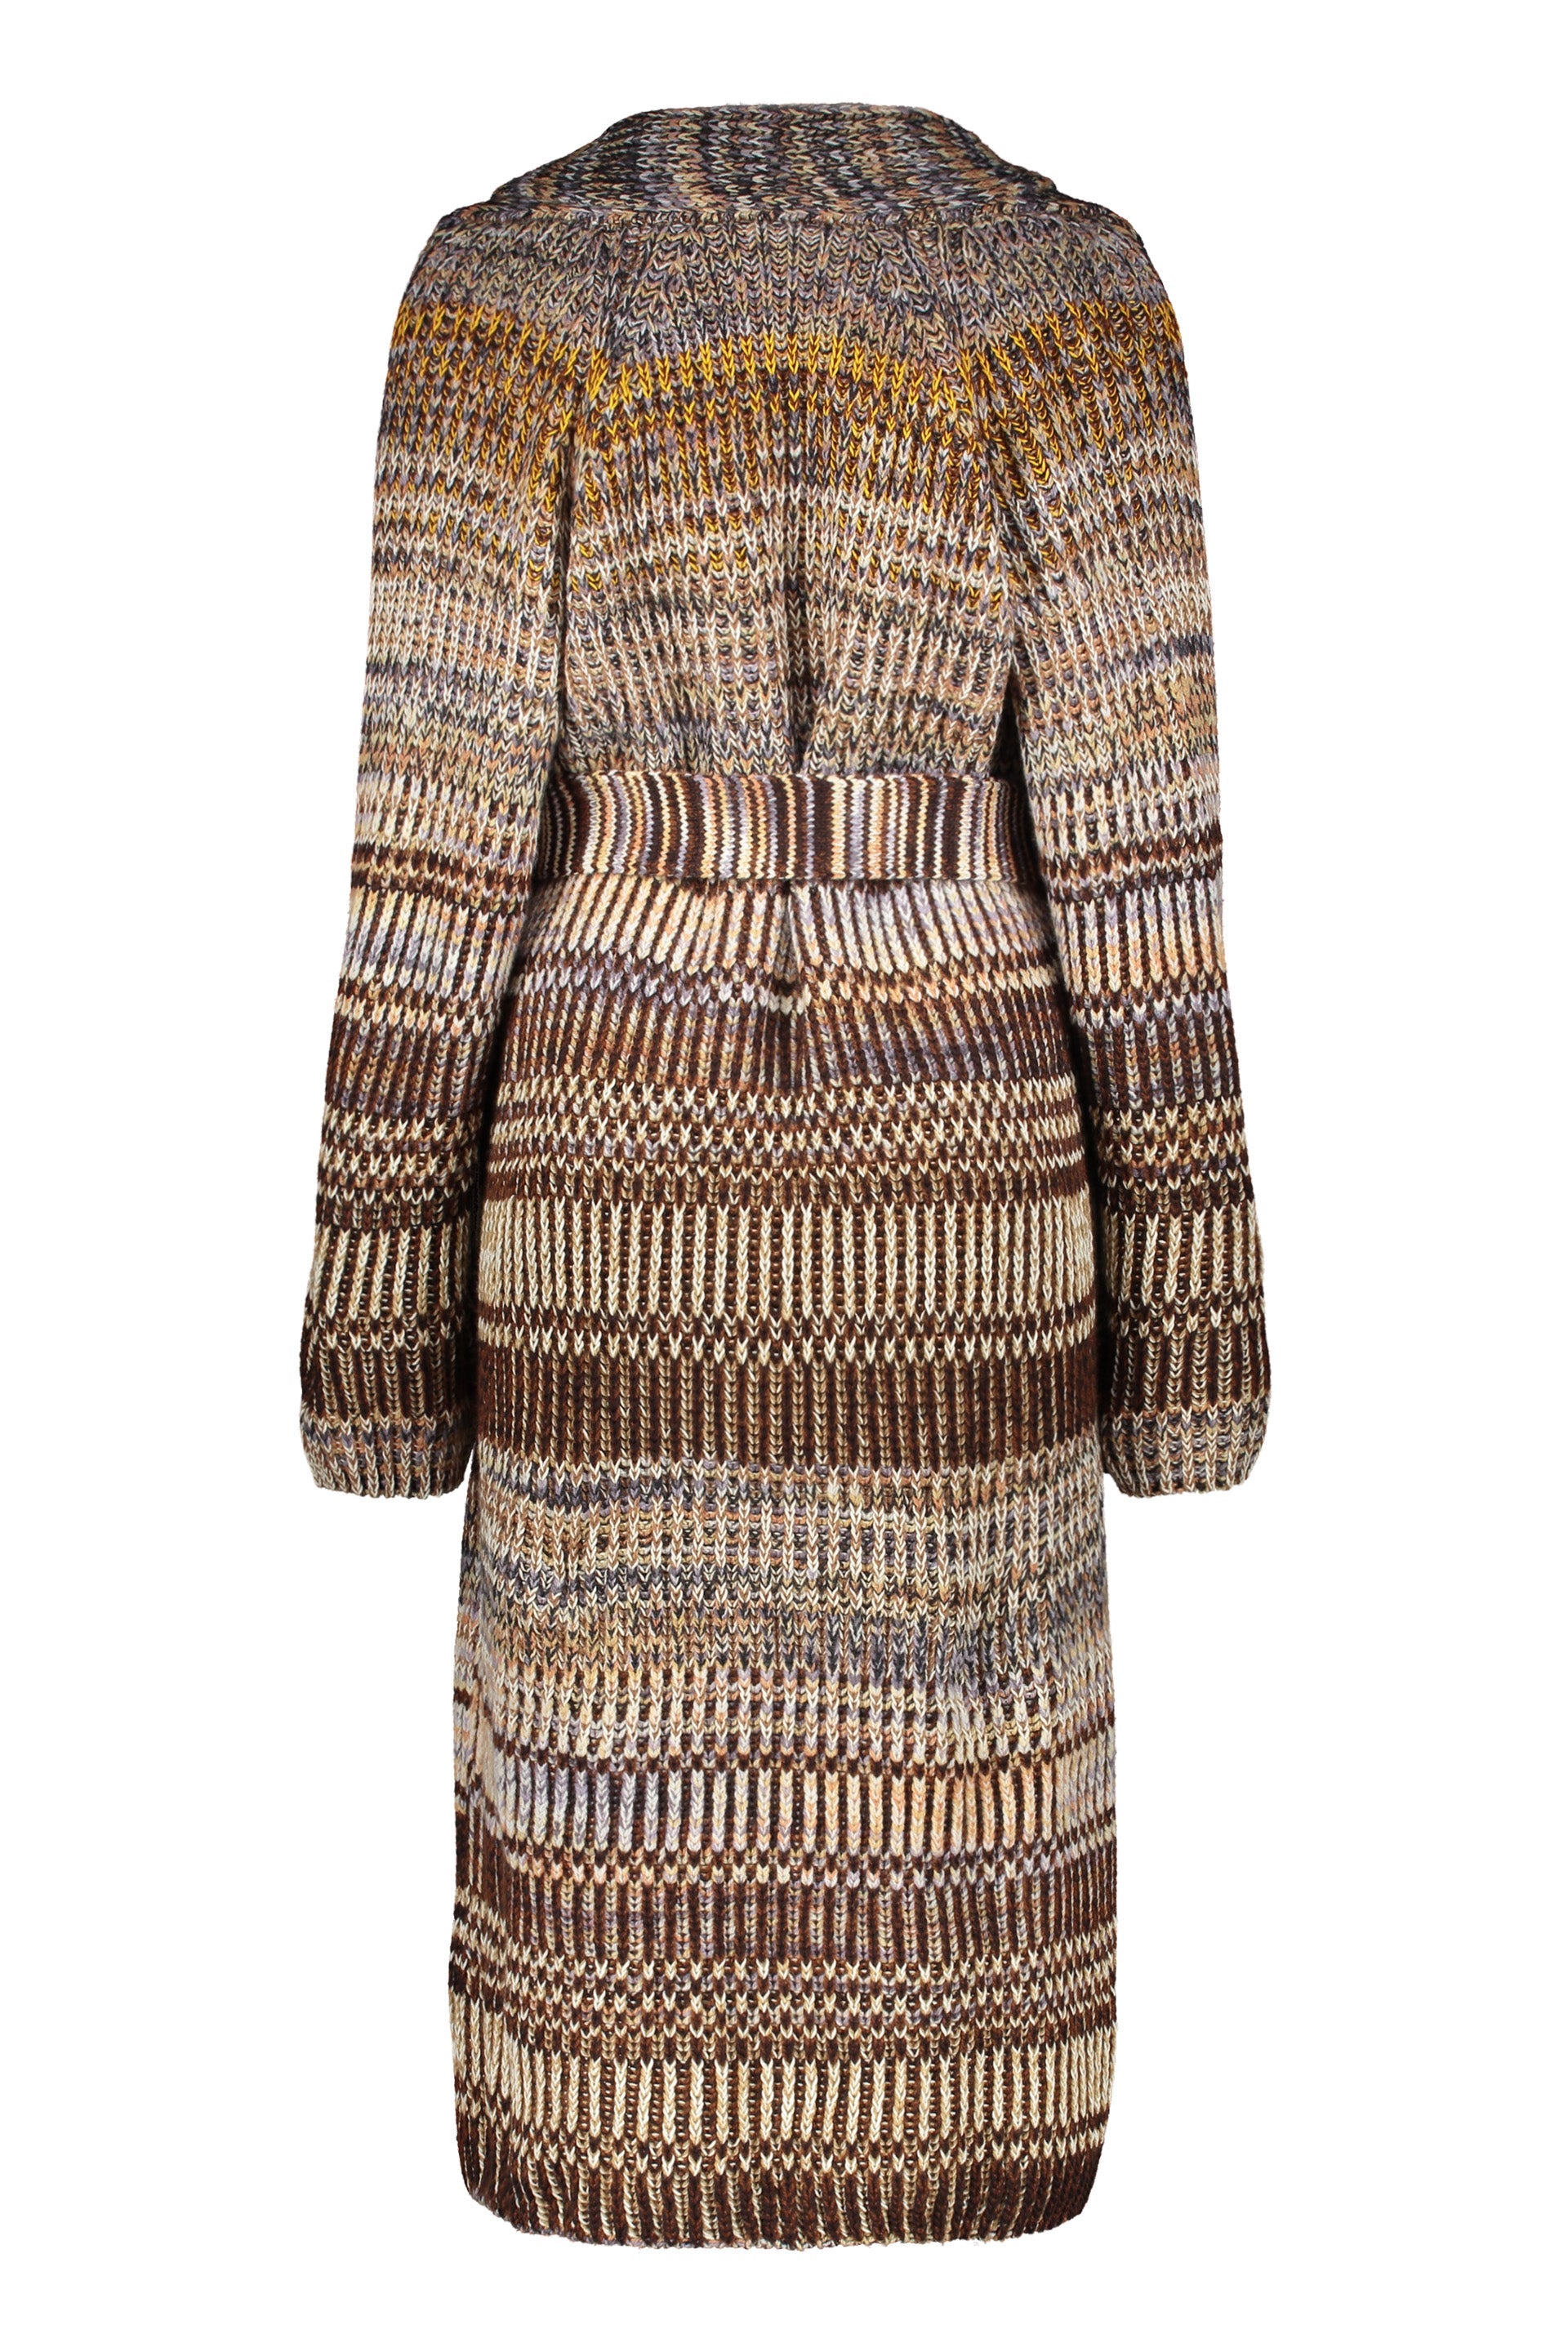 Missoni-OUTLET-SALE-Ribbed-knit-cardigan-Strick-ARCHIVE-COLLECTION-2.jpg